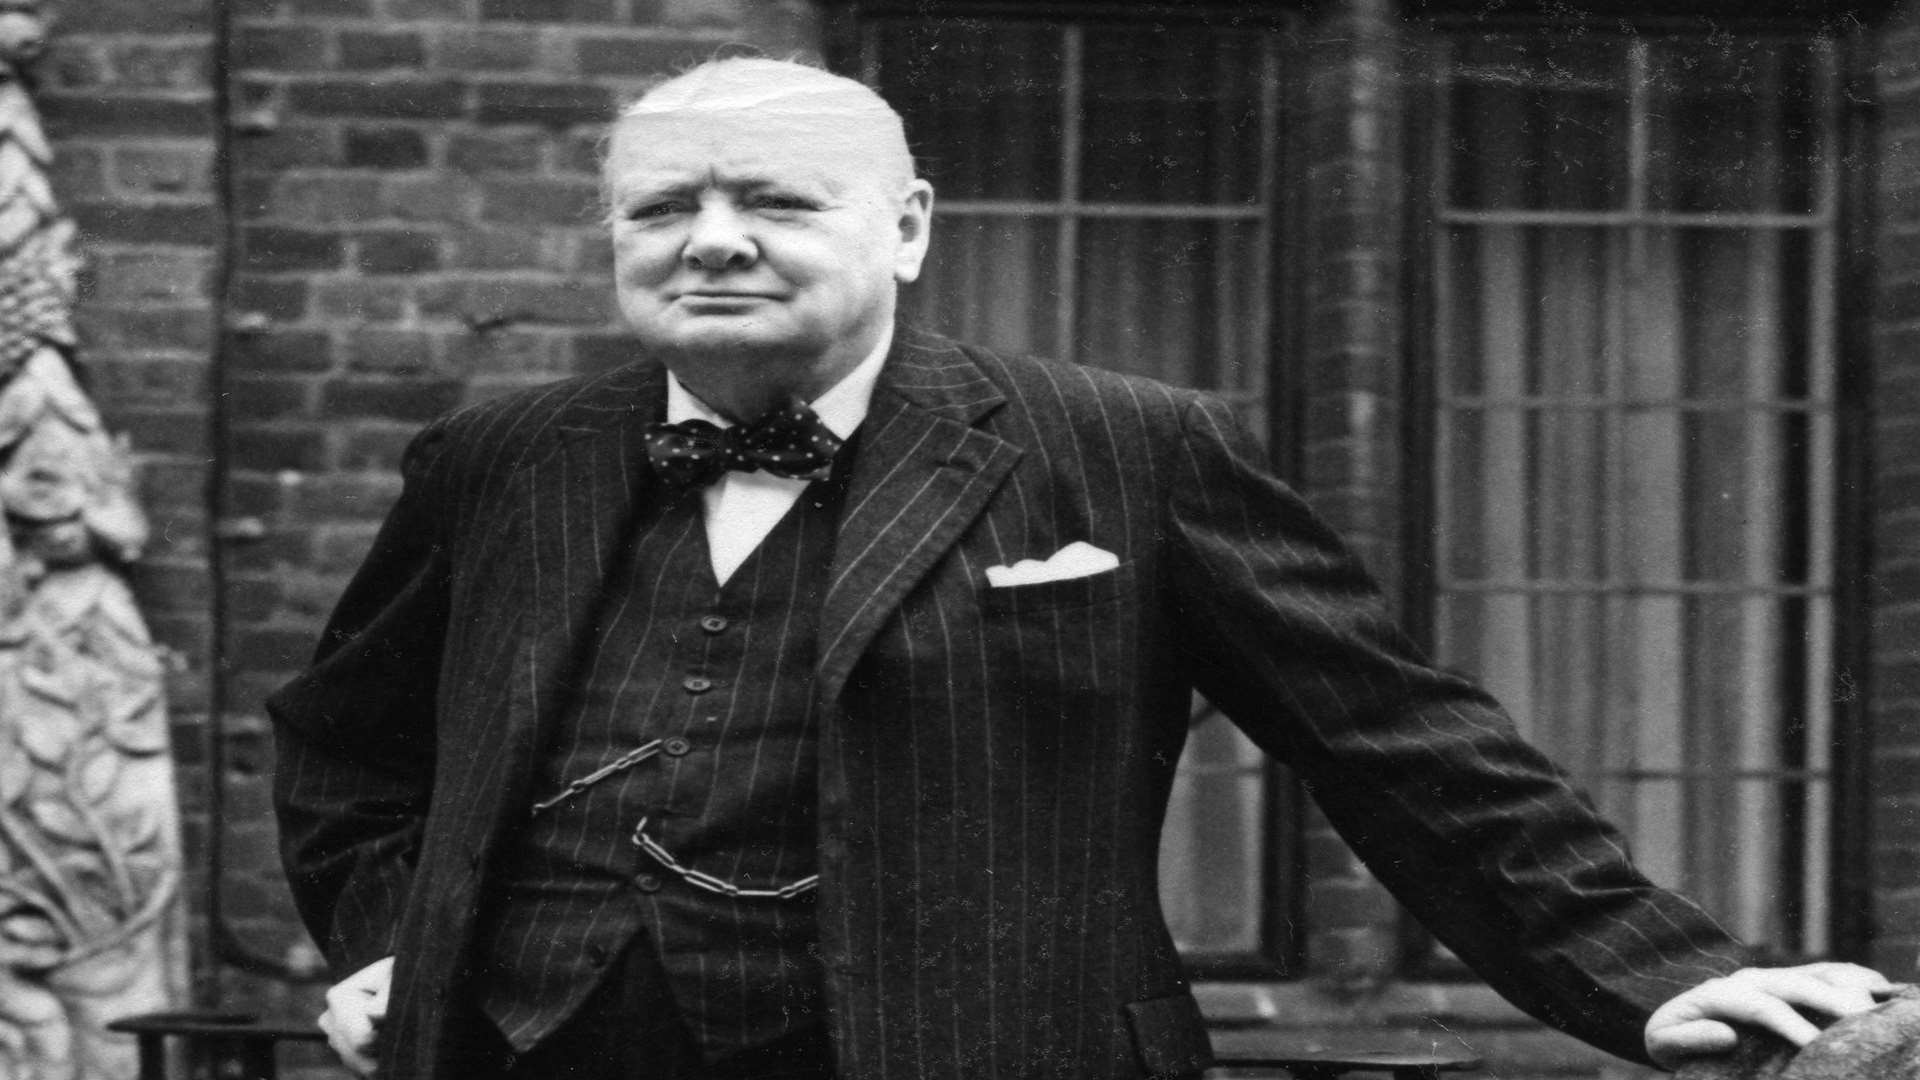 Sir Winston Churchill died in January 1965